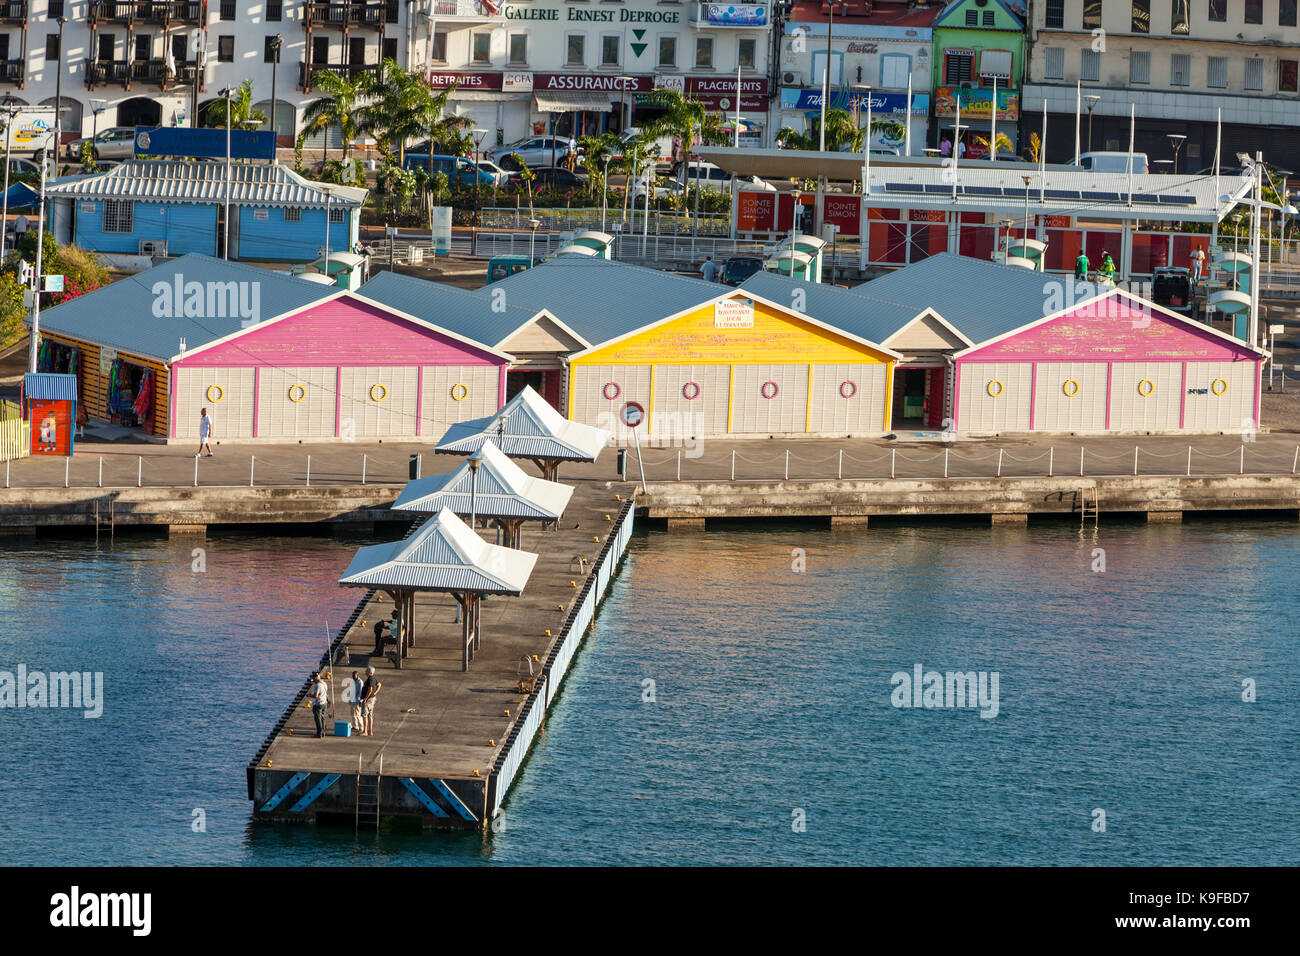 Fort-de-France, Martinique.  Early Morning Fishermen on the Pier by the Souvenir Market for Cruise Ships. Stock Photo